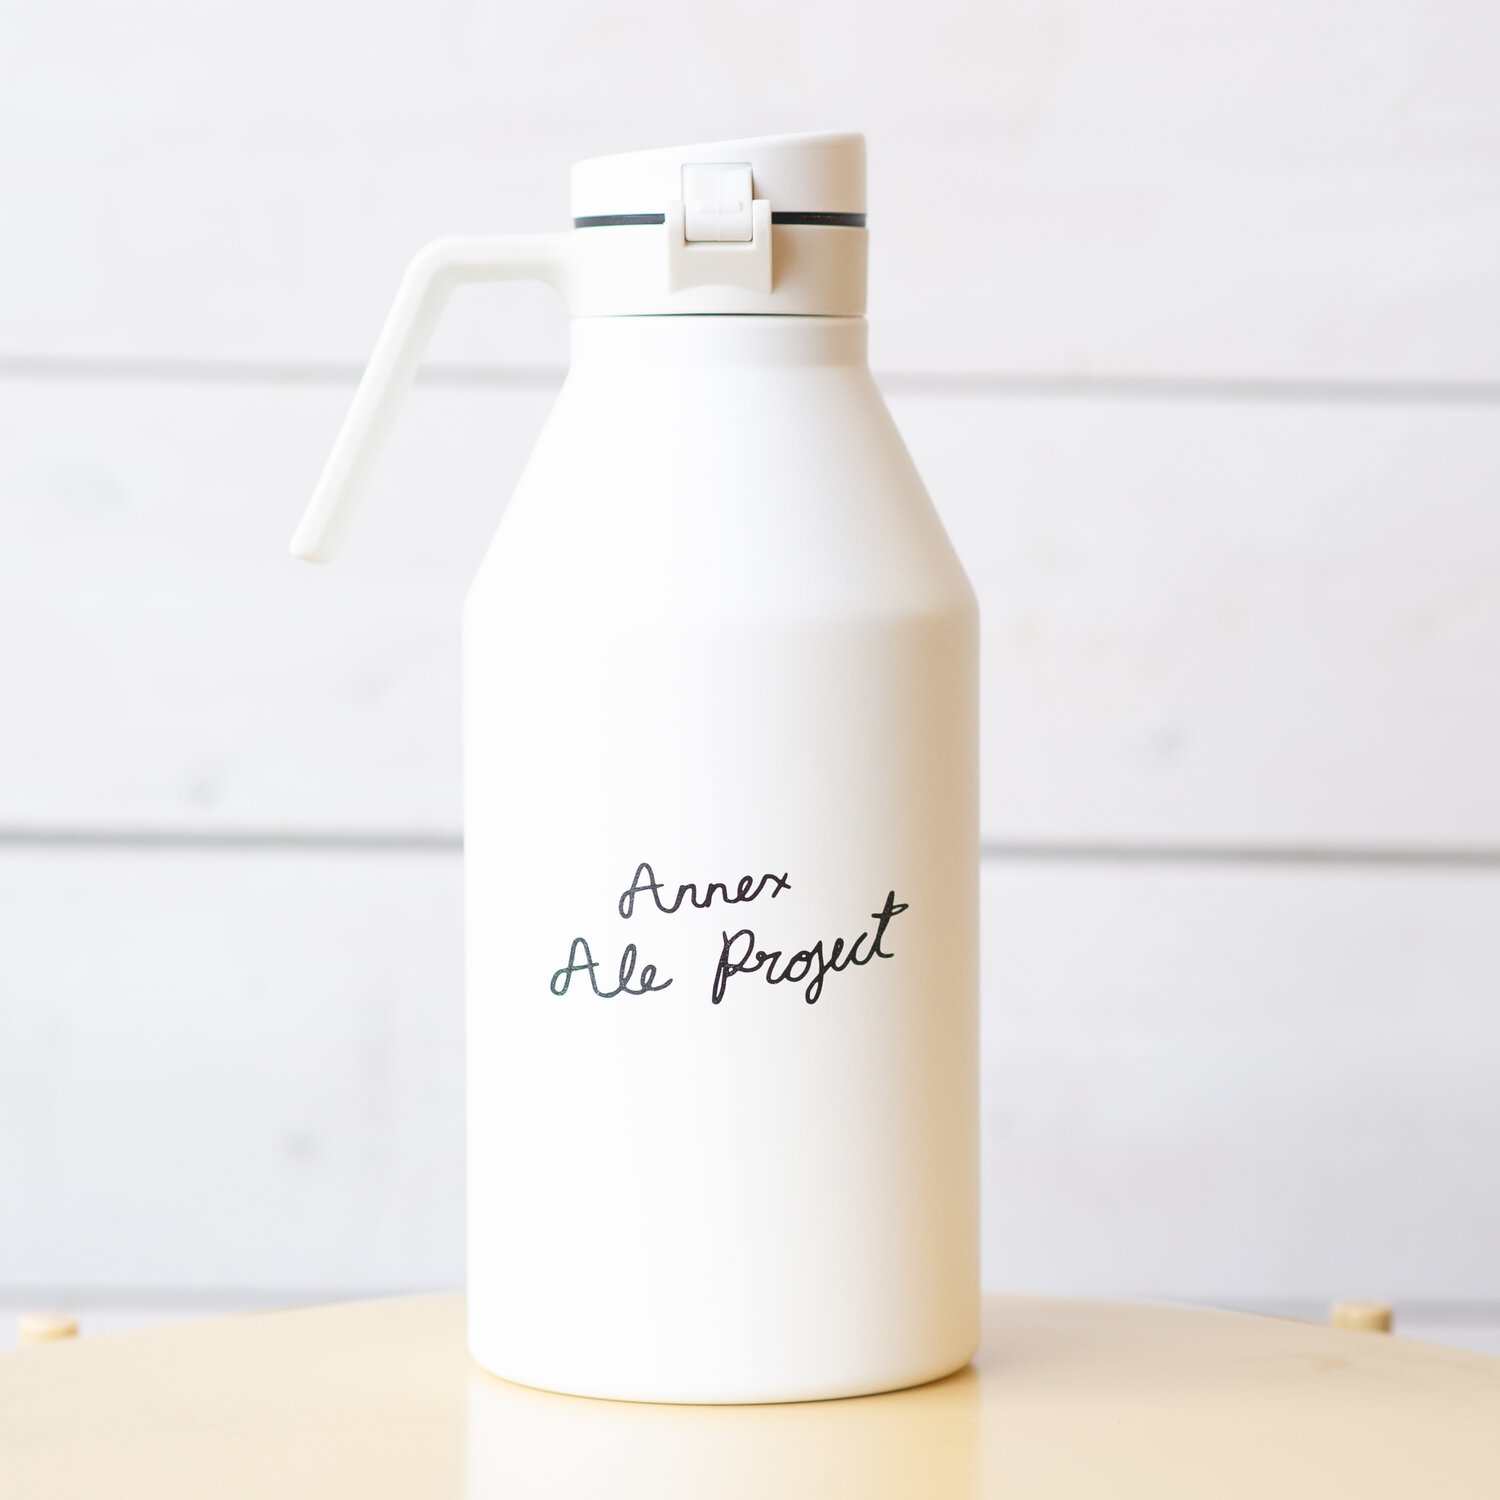 64oz MiiR Insulated Growler  Annex Ale Project